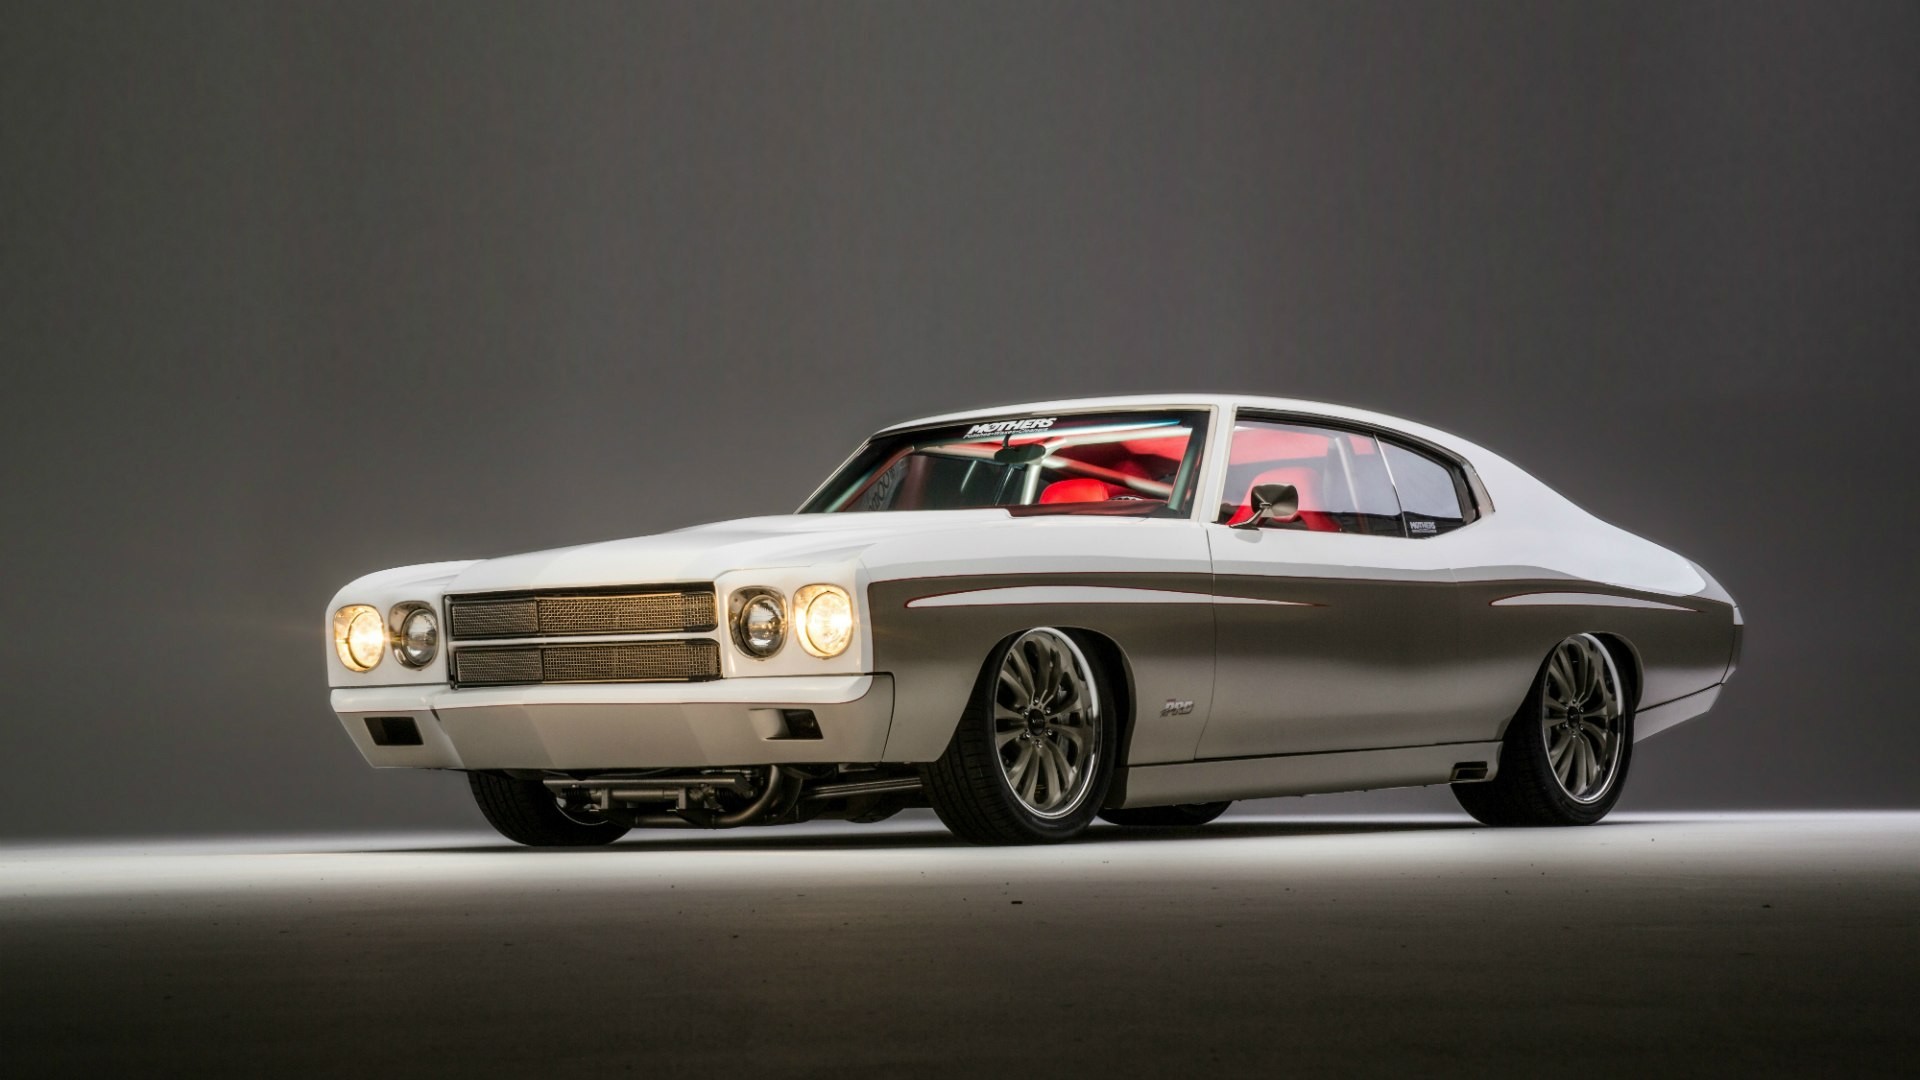 1920x1080 Download-chevrolet-chevelle-ss-beautiful-car-muscle-car-tuning-chevrolet-resolution- wallpaper-wp3804810